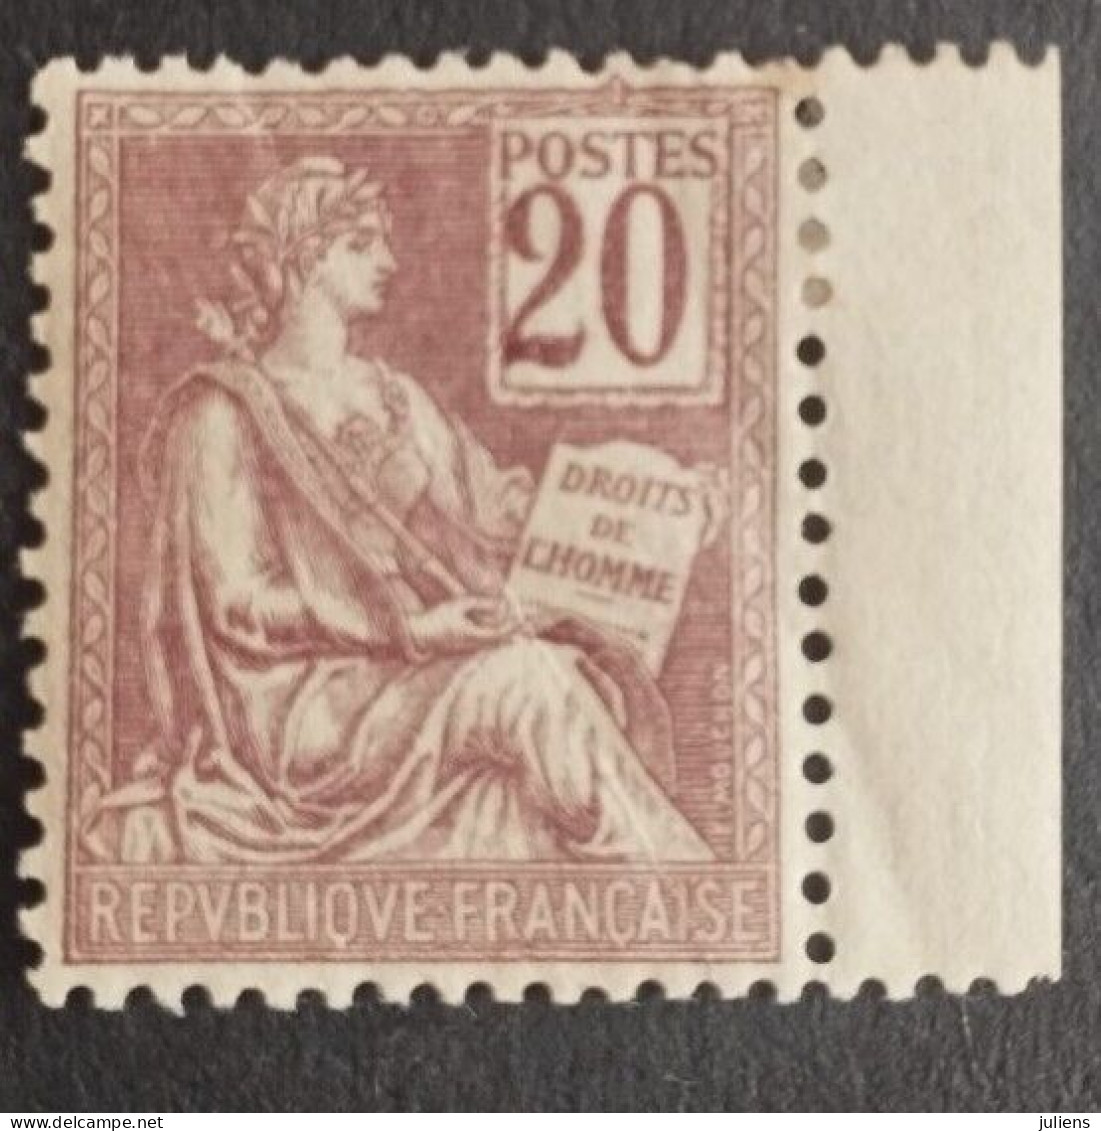 FRANCE TIMBRE TYPE MOUCHON N 113 NEUF* BORD DE FEUILLE #278 - Nuovi